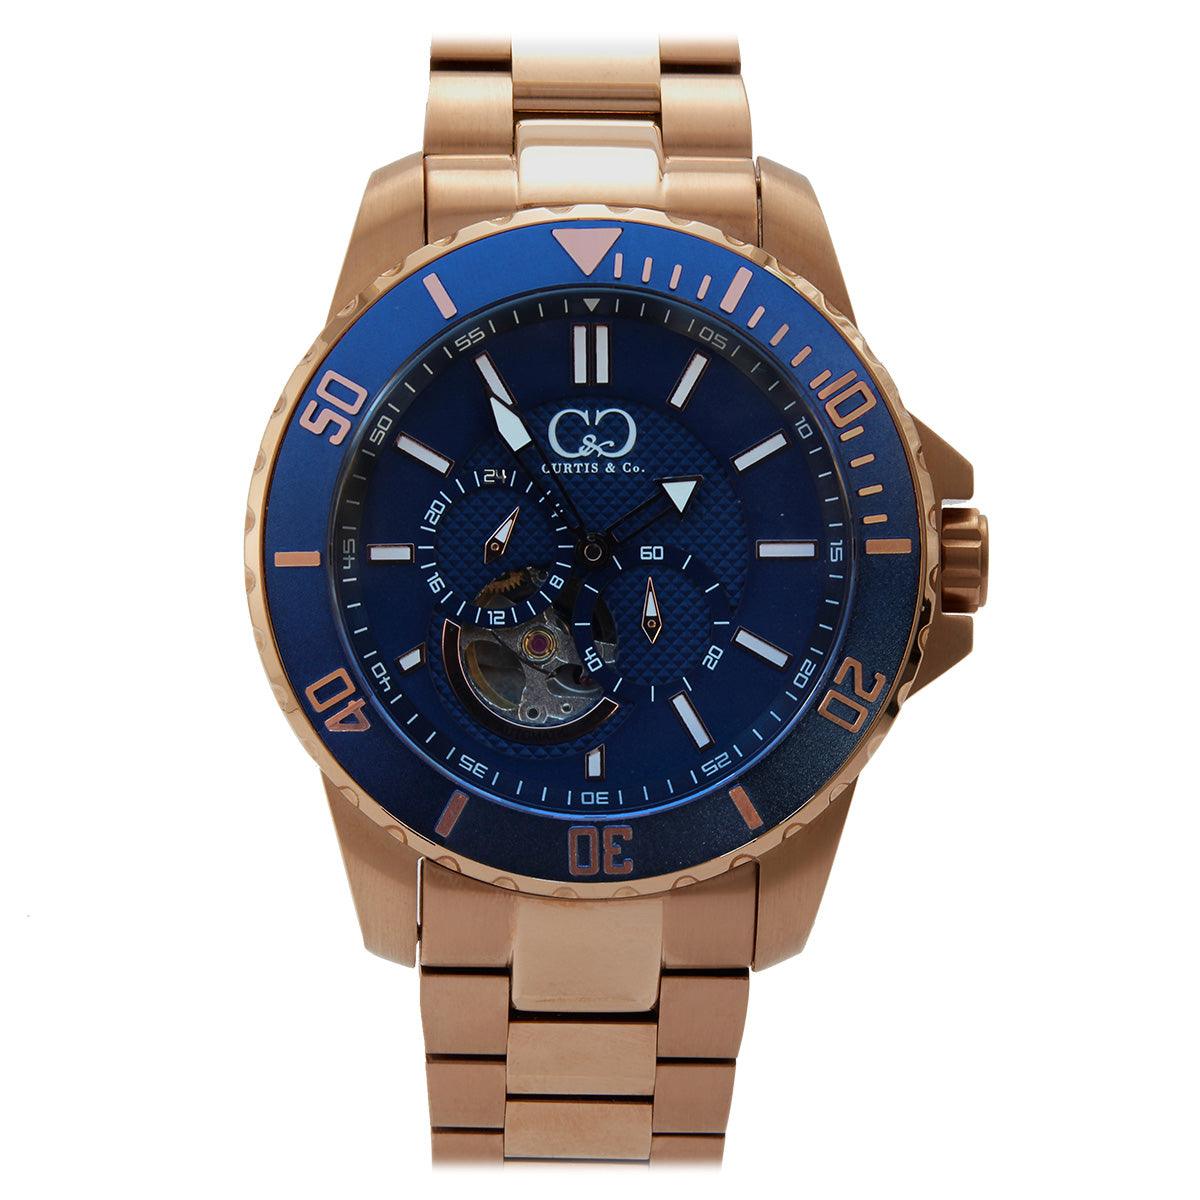 Curtis & Co BIG TIME ROYALE (45 mm) ROSE GOLD CASE / BLUE DIAL Watch - Flyclothing LLC